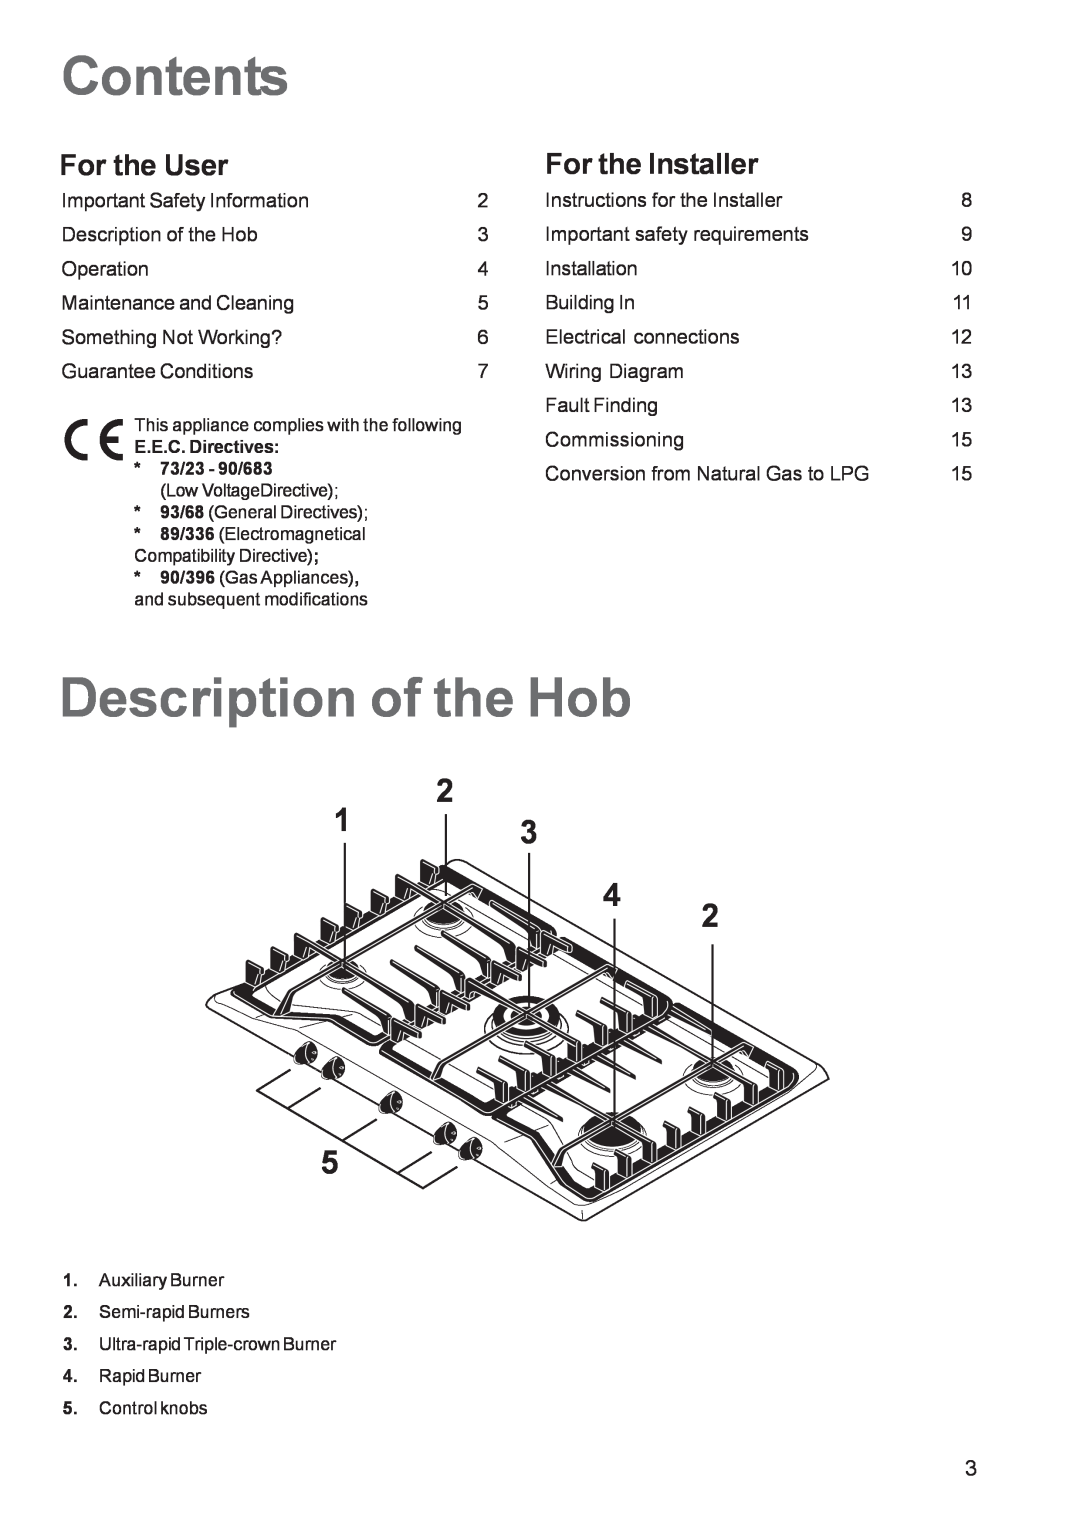 Zanussi ZGF 982 manual Contents, Description of the Hob, For the User, For the Installer 